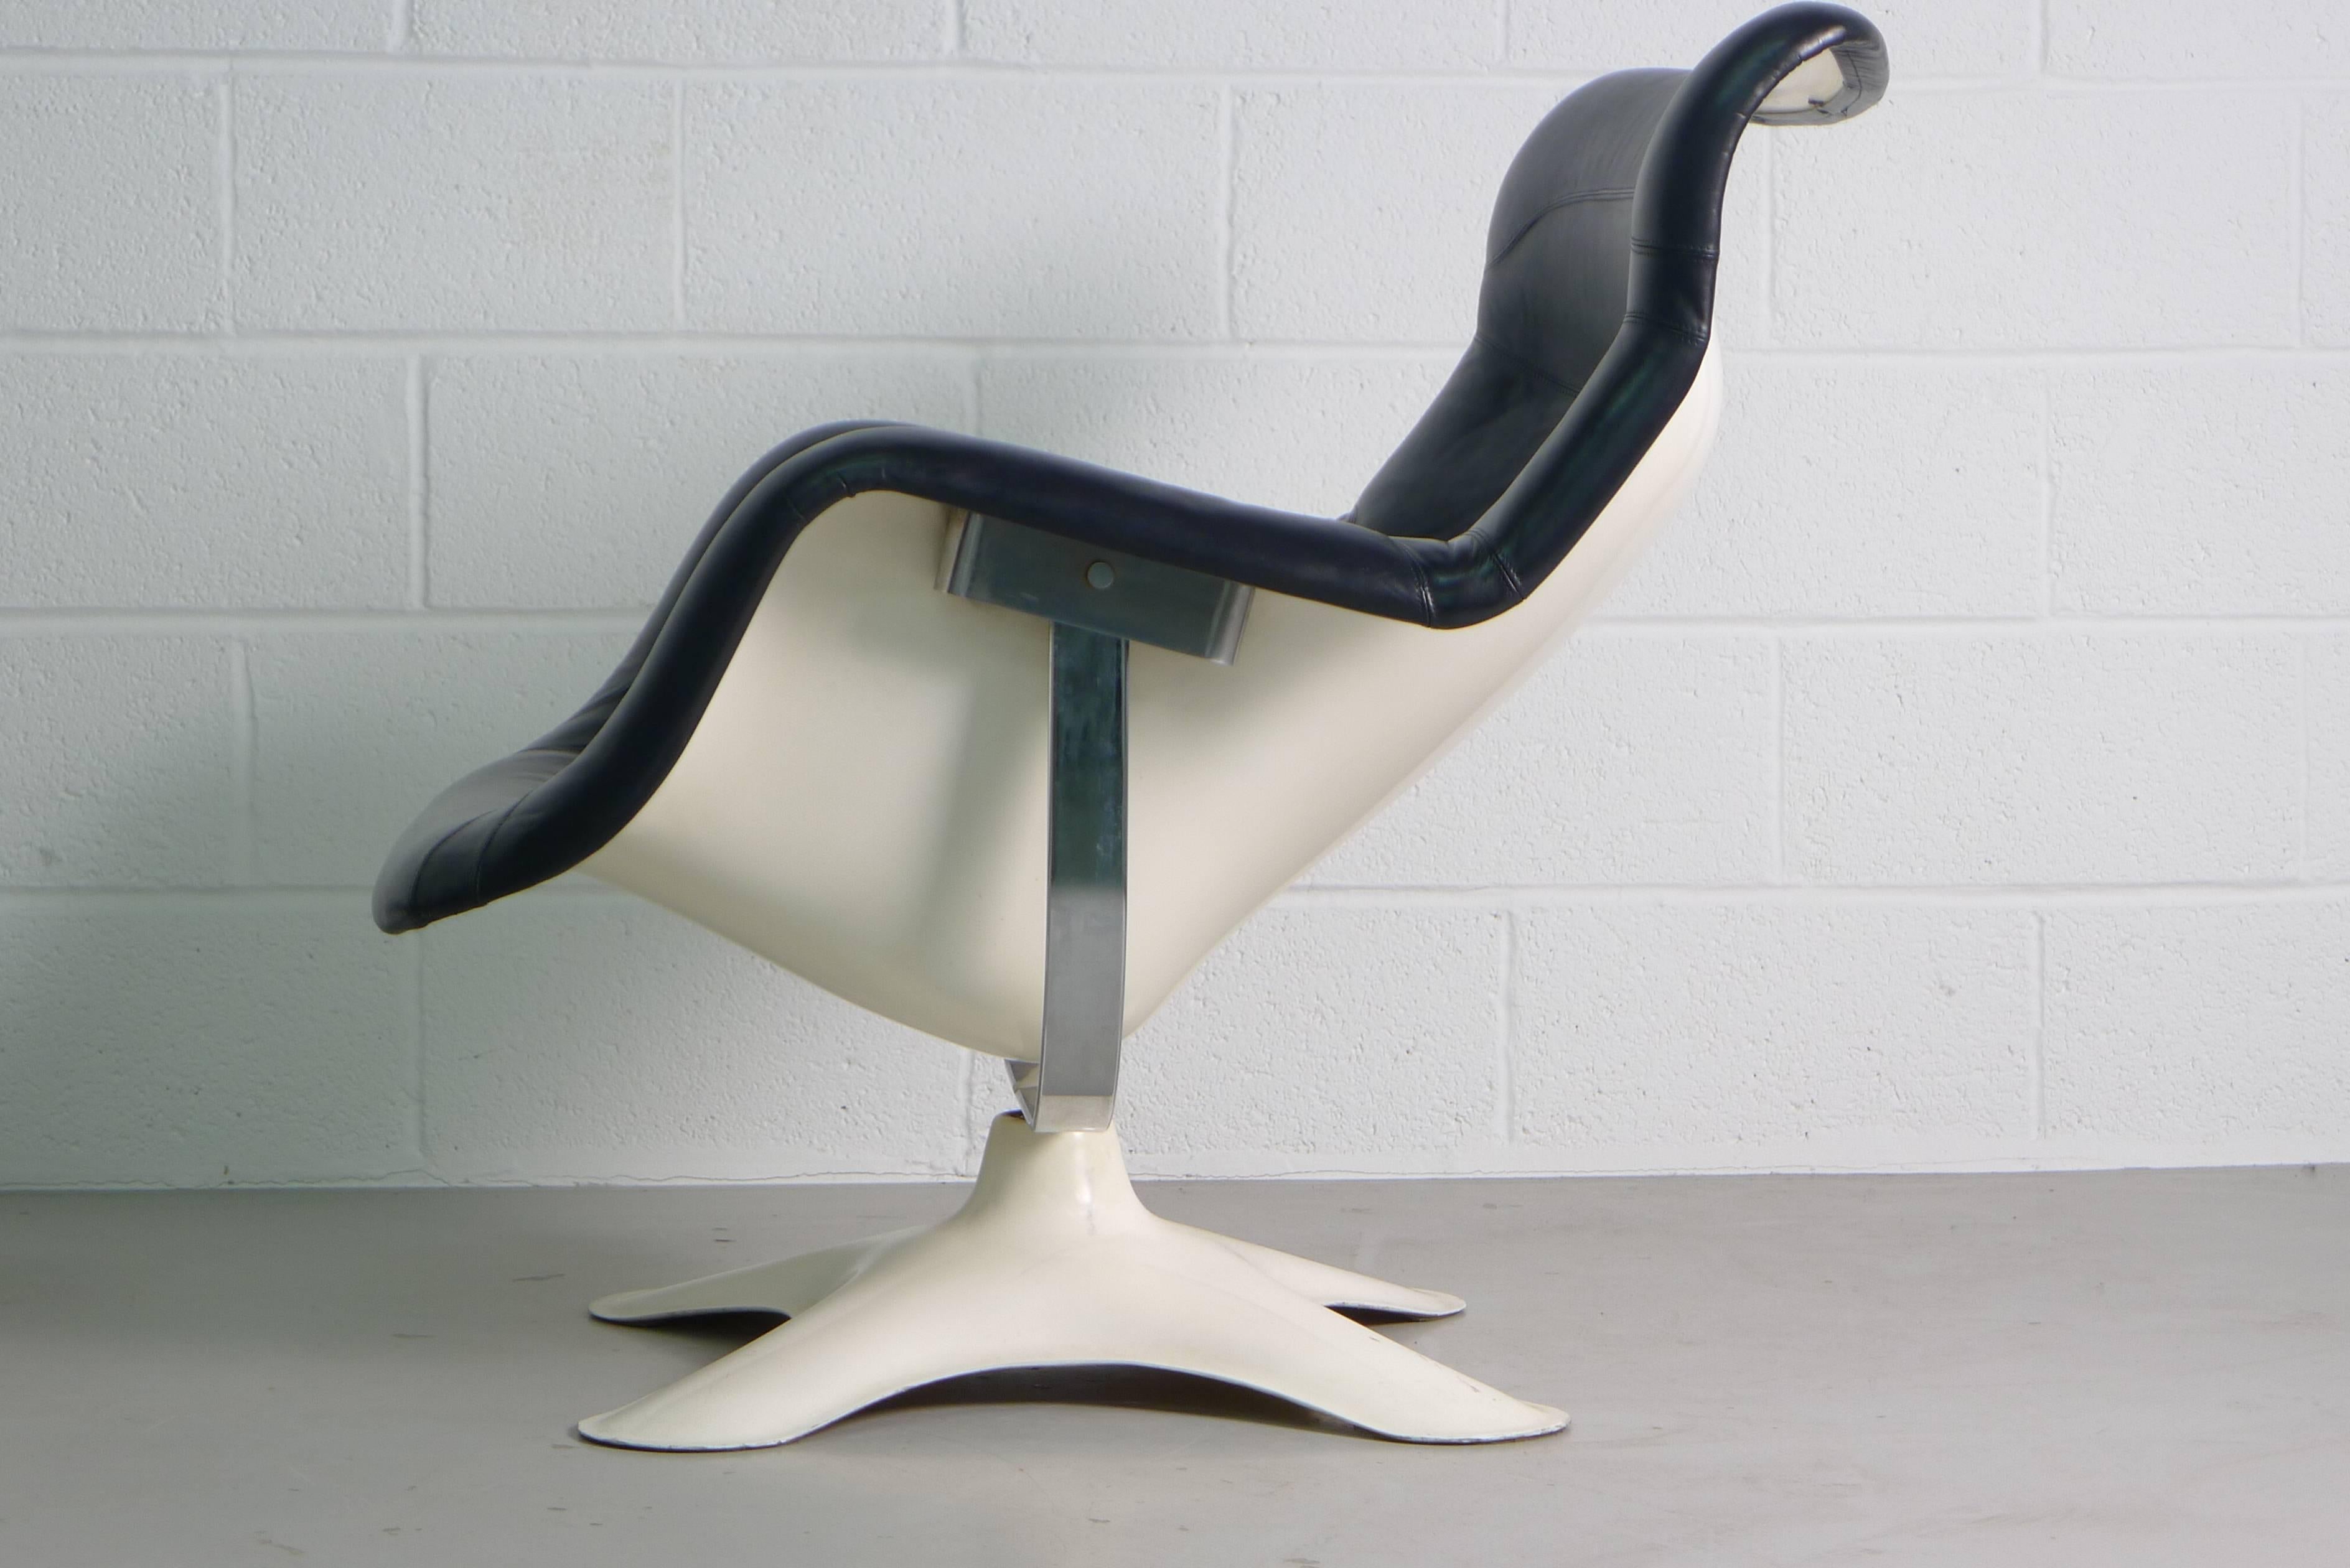 Yrjo Kukkapuro Karuselli chair for Haimi, Finland, 1964.
Chair and stool in beautifully patinated black leather over white fibreglass shell, chair reclines and swivels. 
Both pieces retain their original Haimi labels.

Measurements of ottoman 38